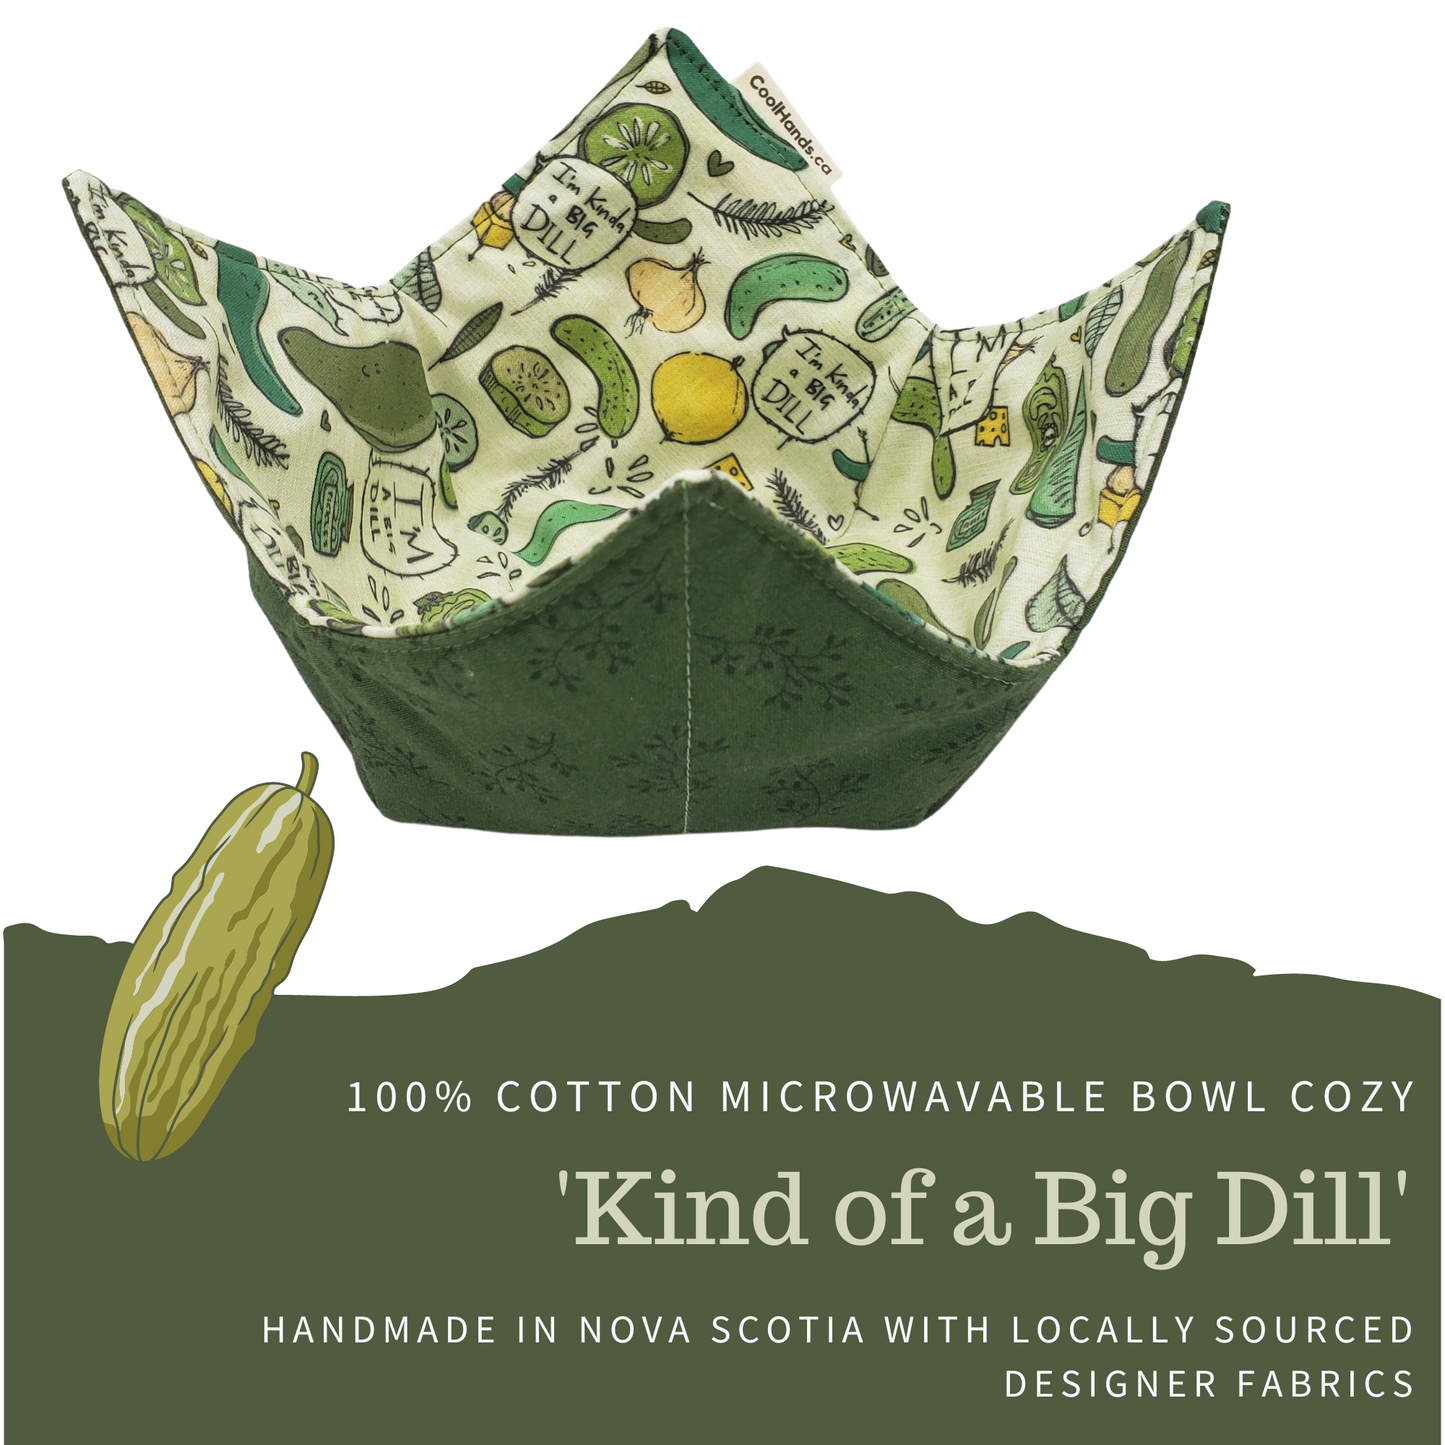 100% Cotton Microwavable Bowl Cozy - Kind of a Big Dill